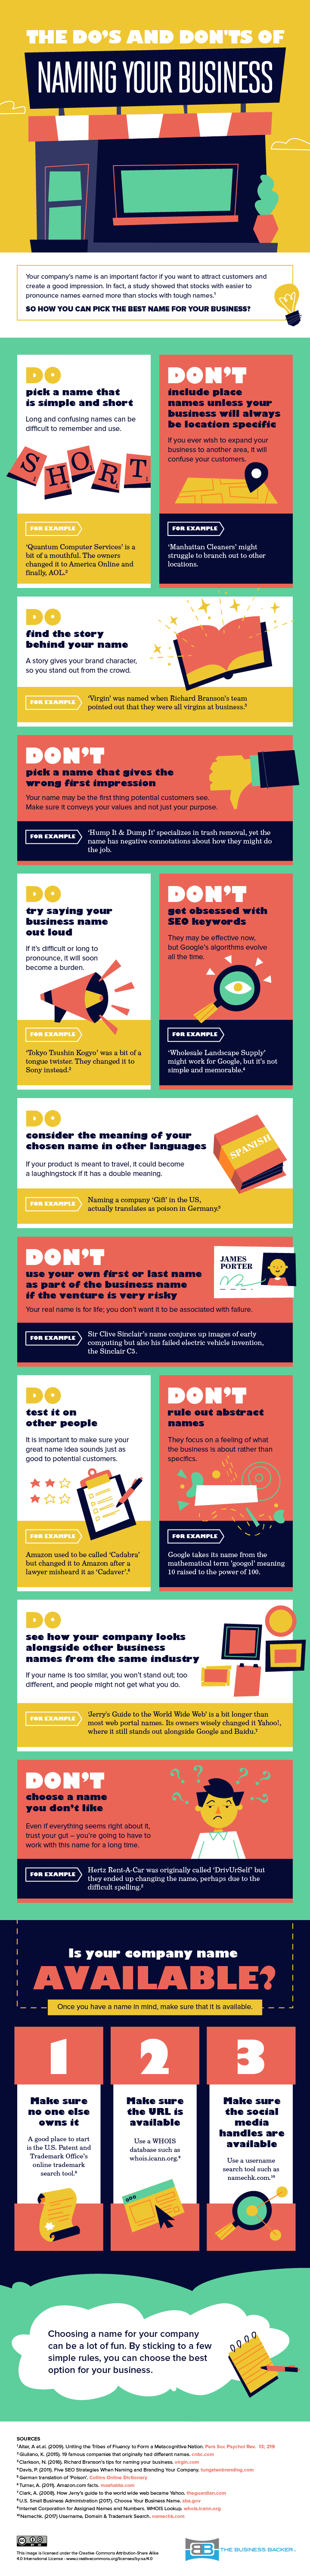 The Do's And Don'ts Of Naming Your Business